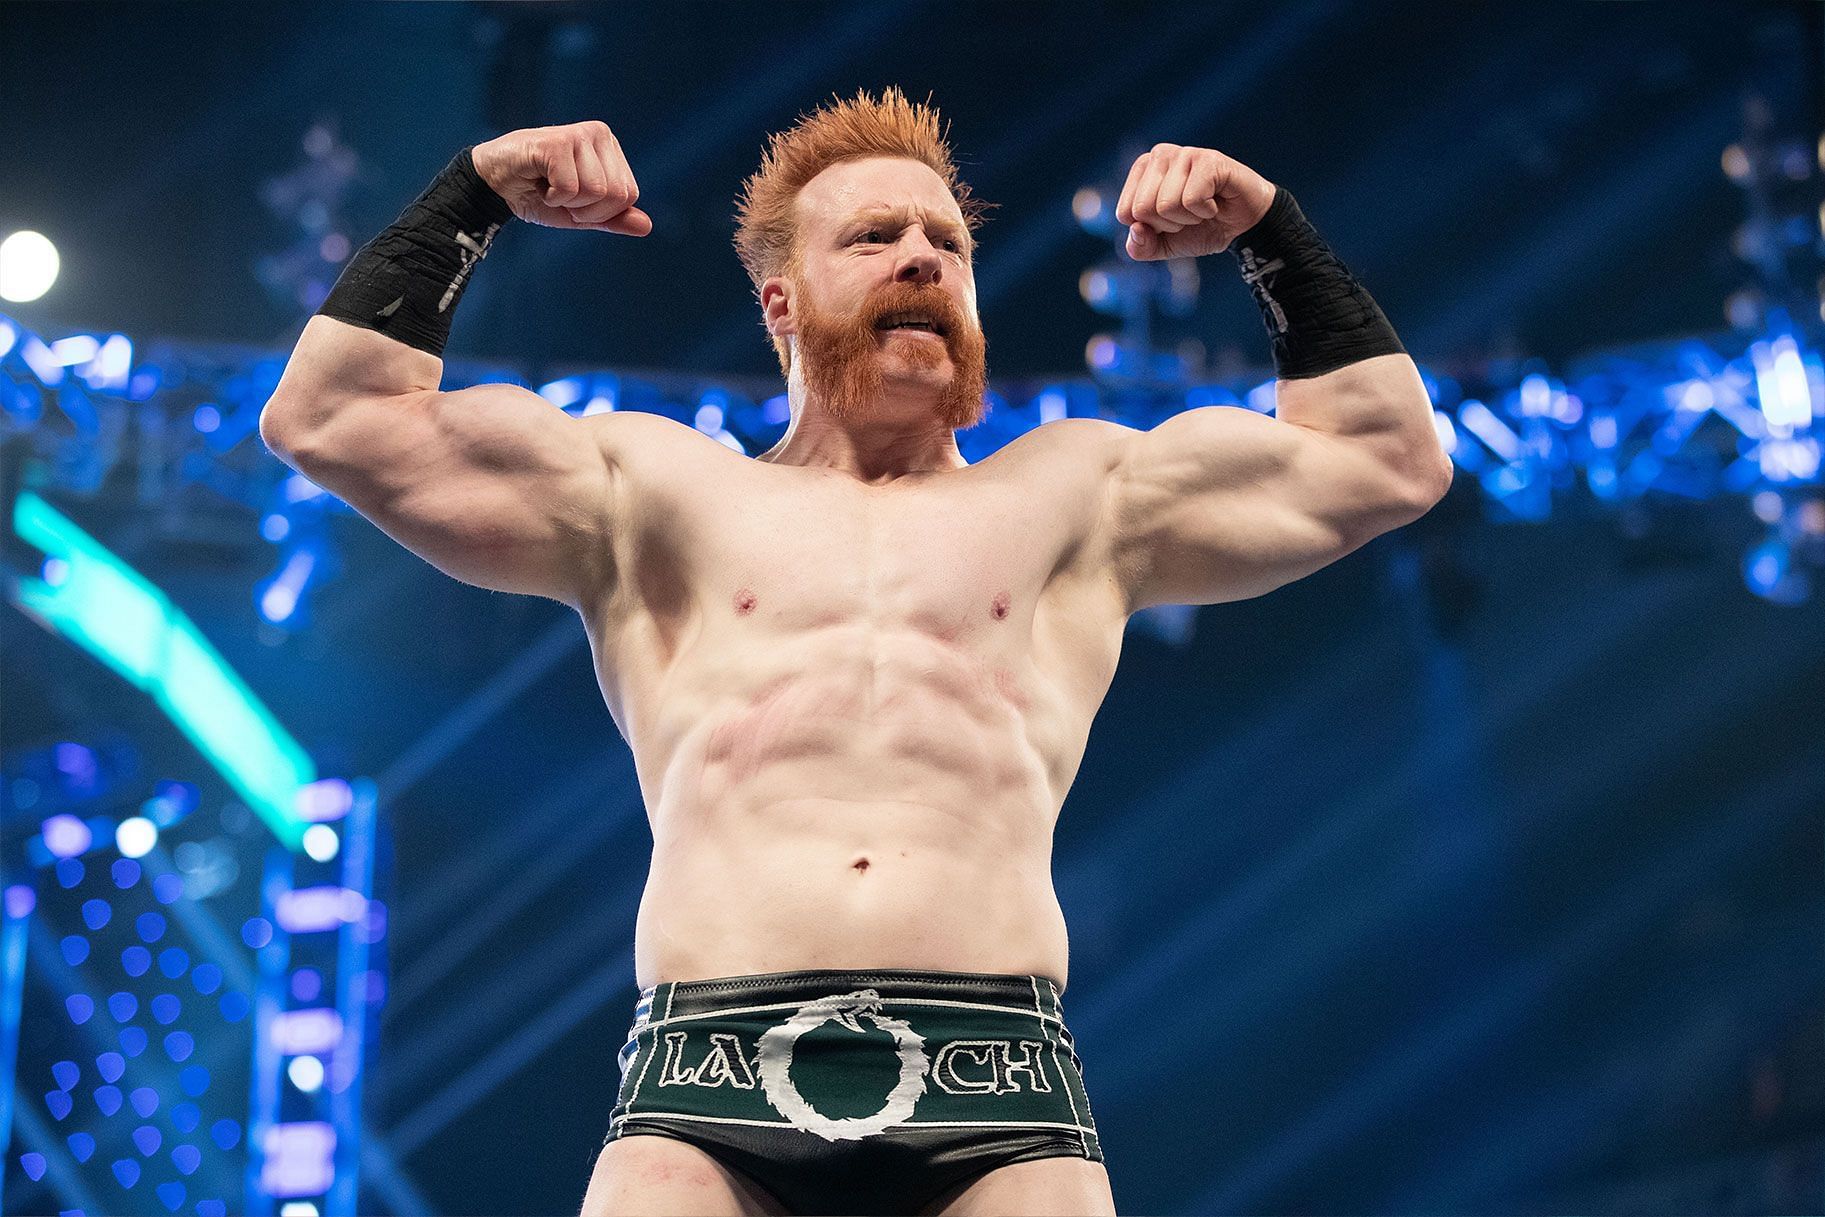 Sheamus and Gunther had one of the more memorable matches of 2022